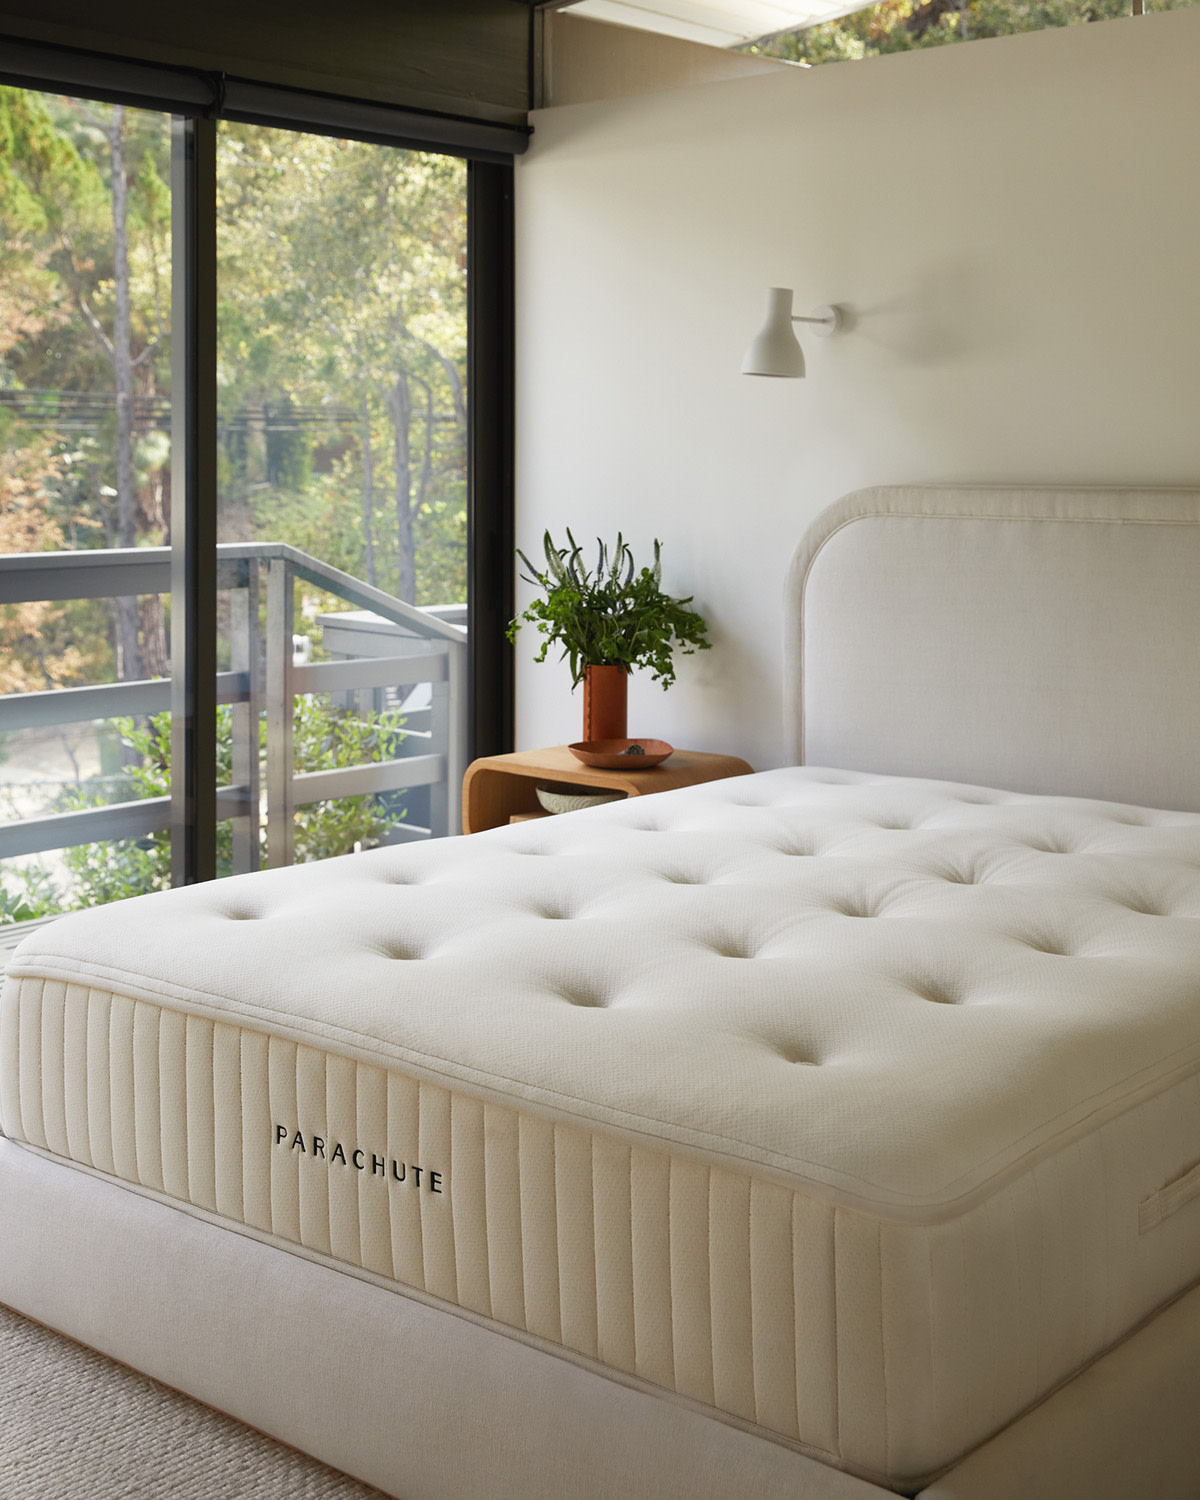 A bare Parachute mattress in a bright bedroom.